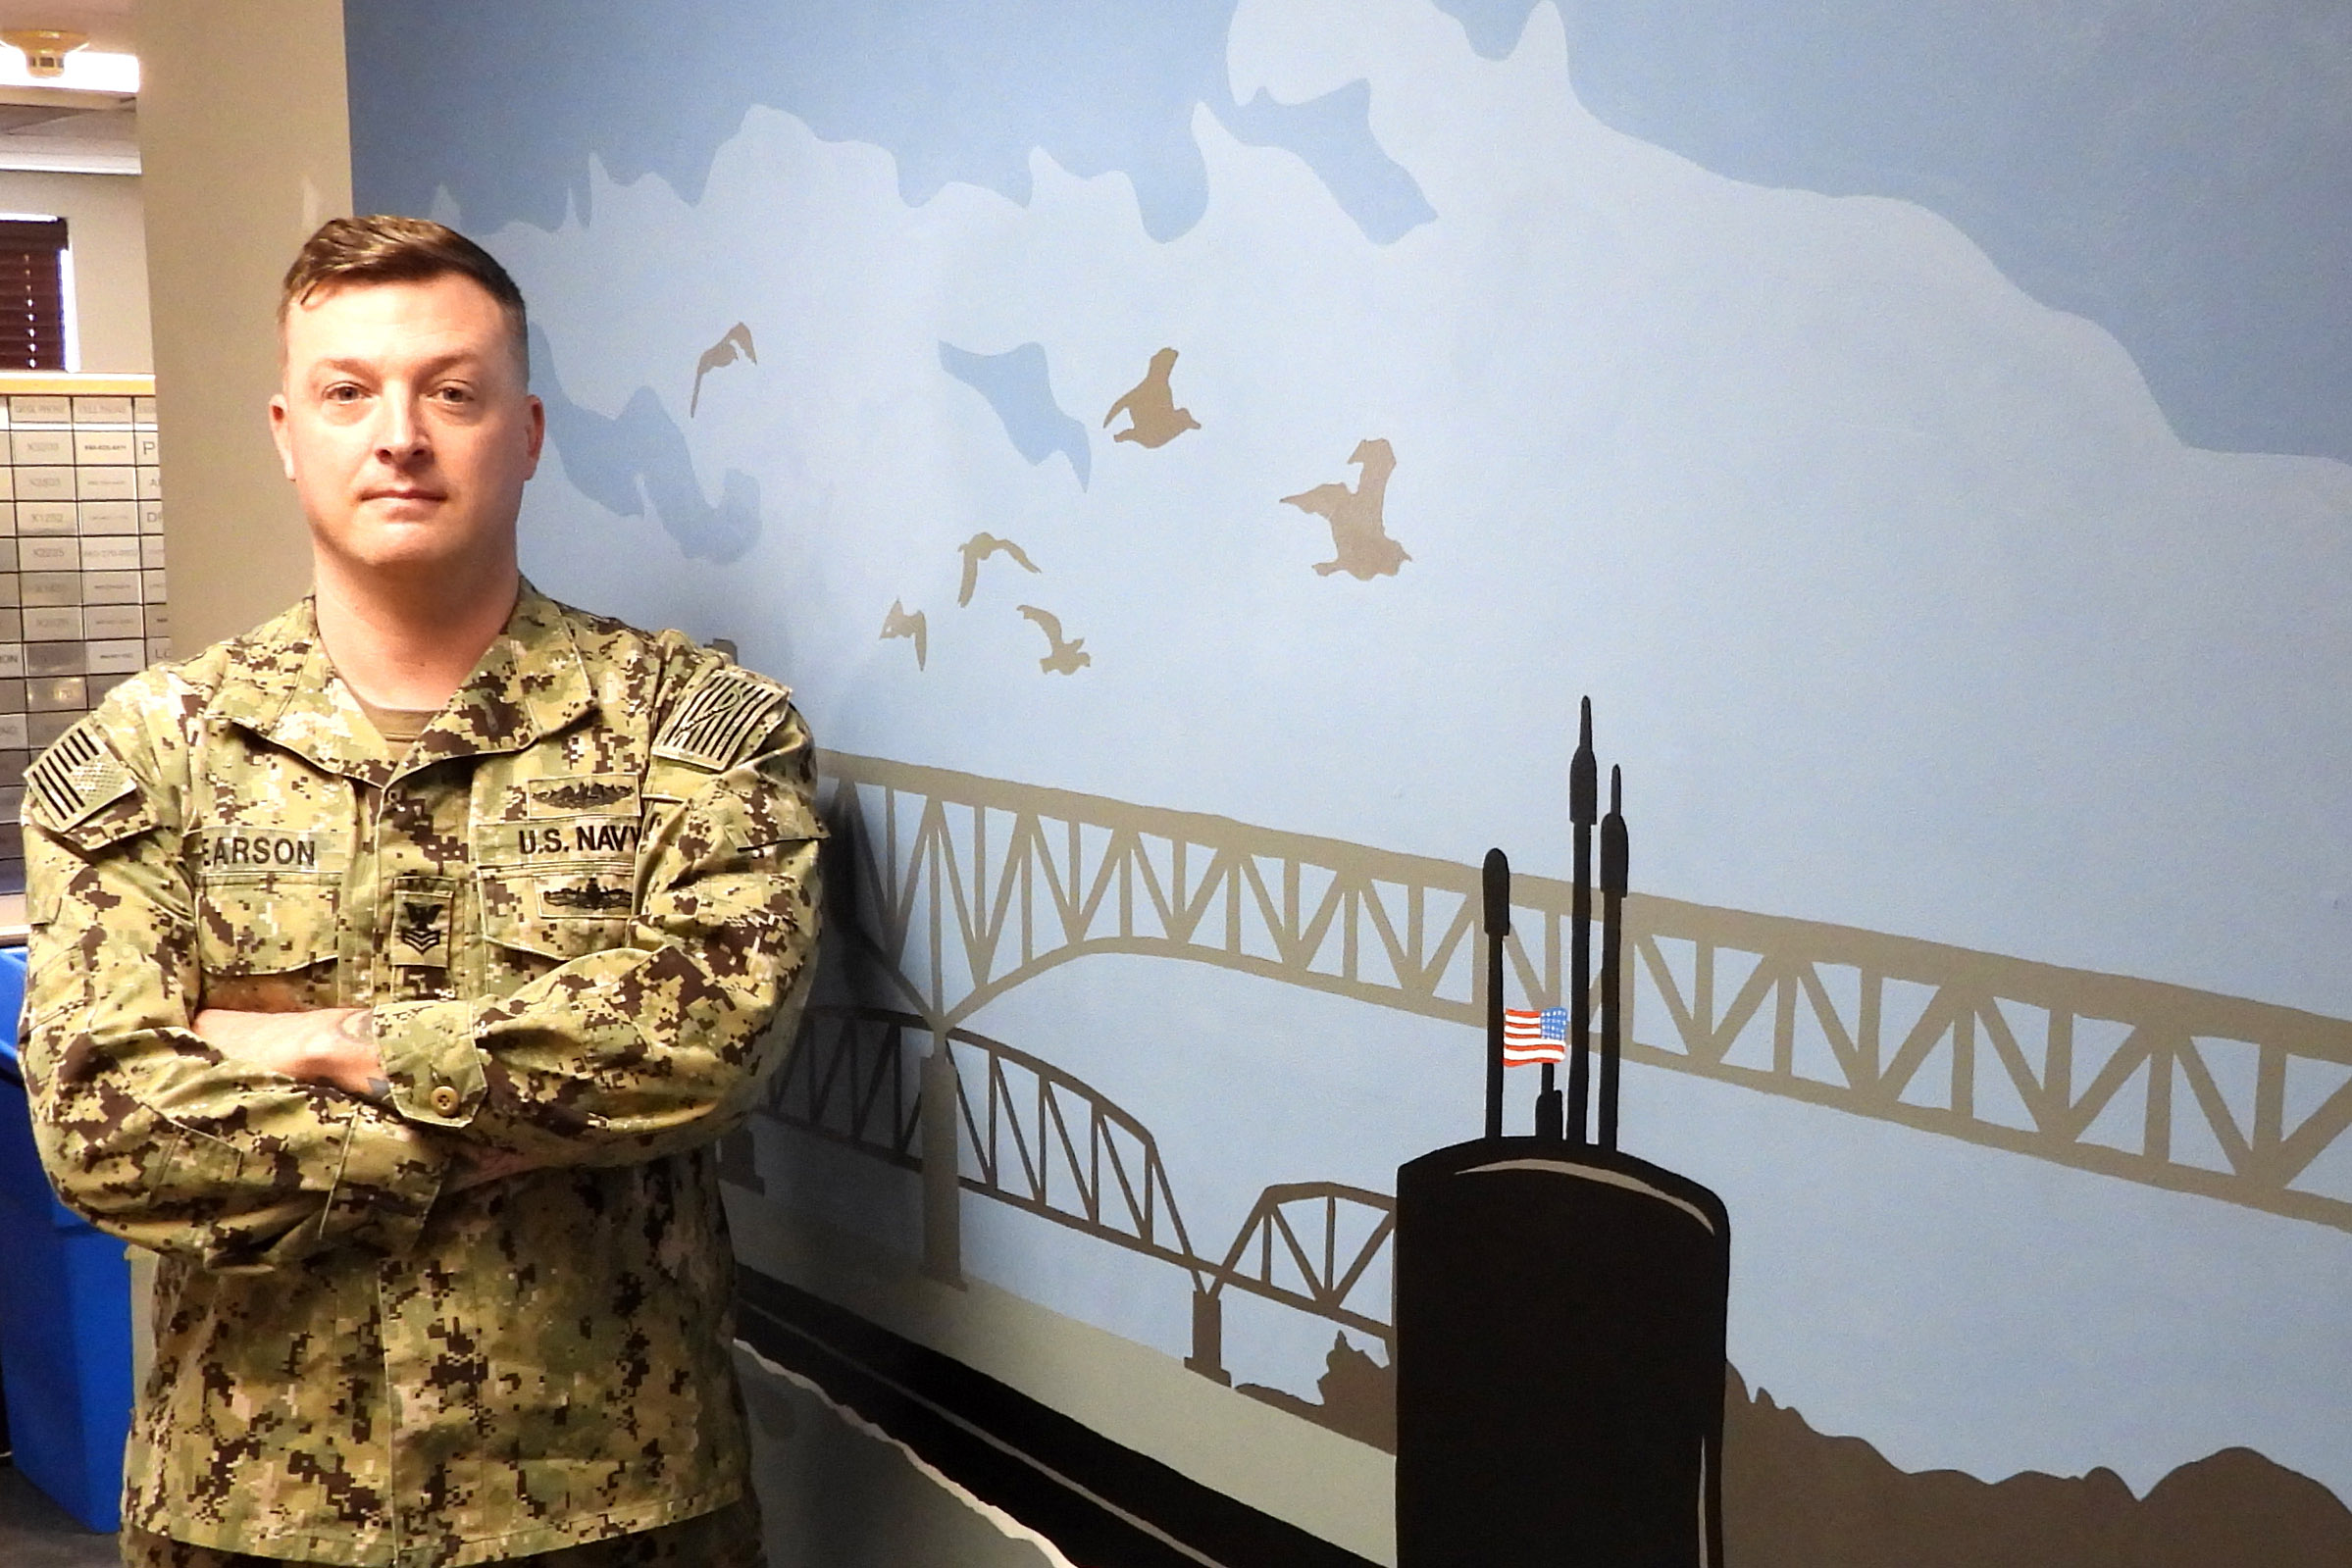 210308-N-AY957-012 GROTON, Conn. (March 8, 2021) – Petty Officer 1st Class Jamie Pearson, a Machinist’s Mate (Auxiliary) assigned to Naval Submarine Support Facility New London, stands in front of a mural he painted for his command’s conference room. Pearson has been moonlighting as an artist on and off base in the Groton community since 2014. (photo by Chief Petty Officer Joshua Karsten/RELEASED)